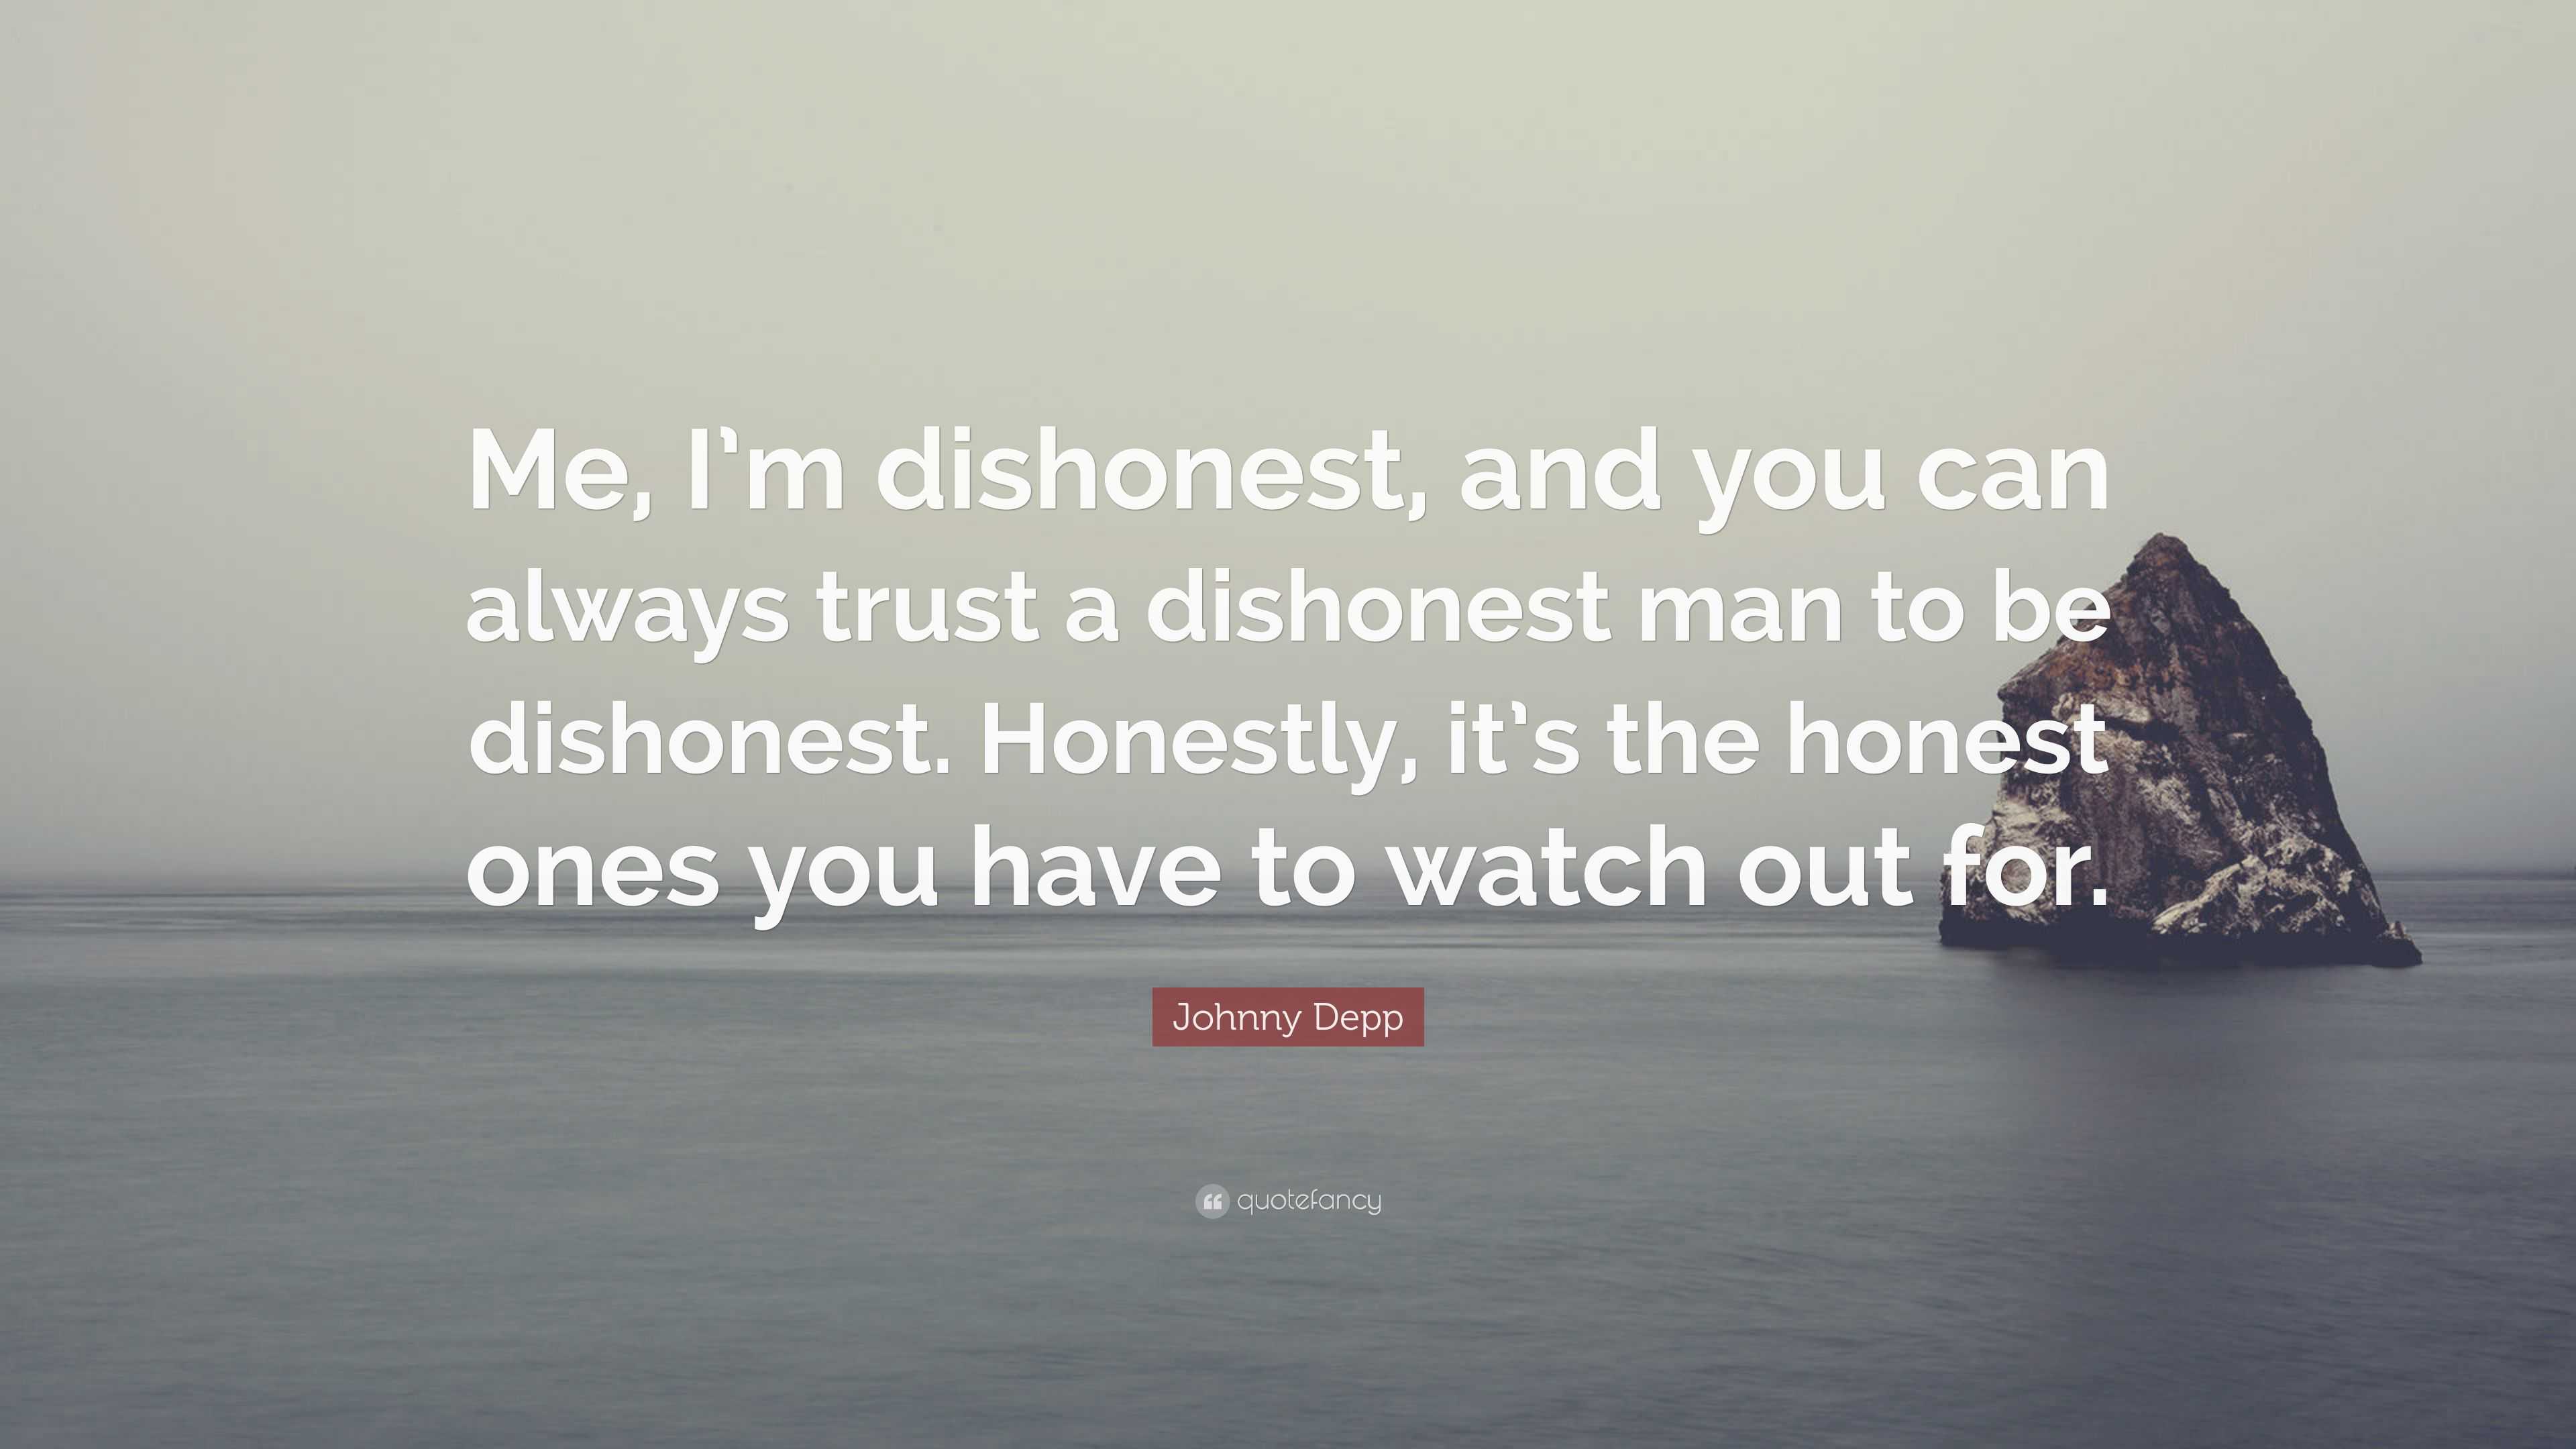 Johnny Depp Quote: “Me, I’m dishonest, and you can always trust a ...